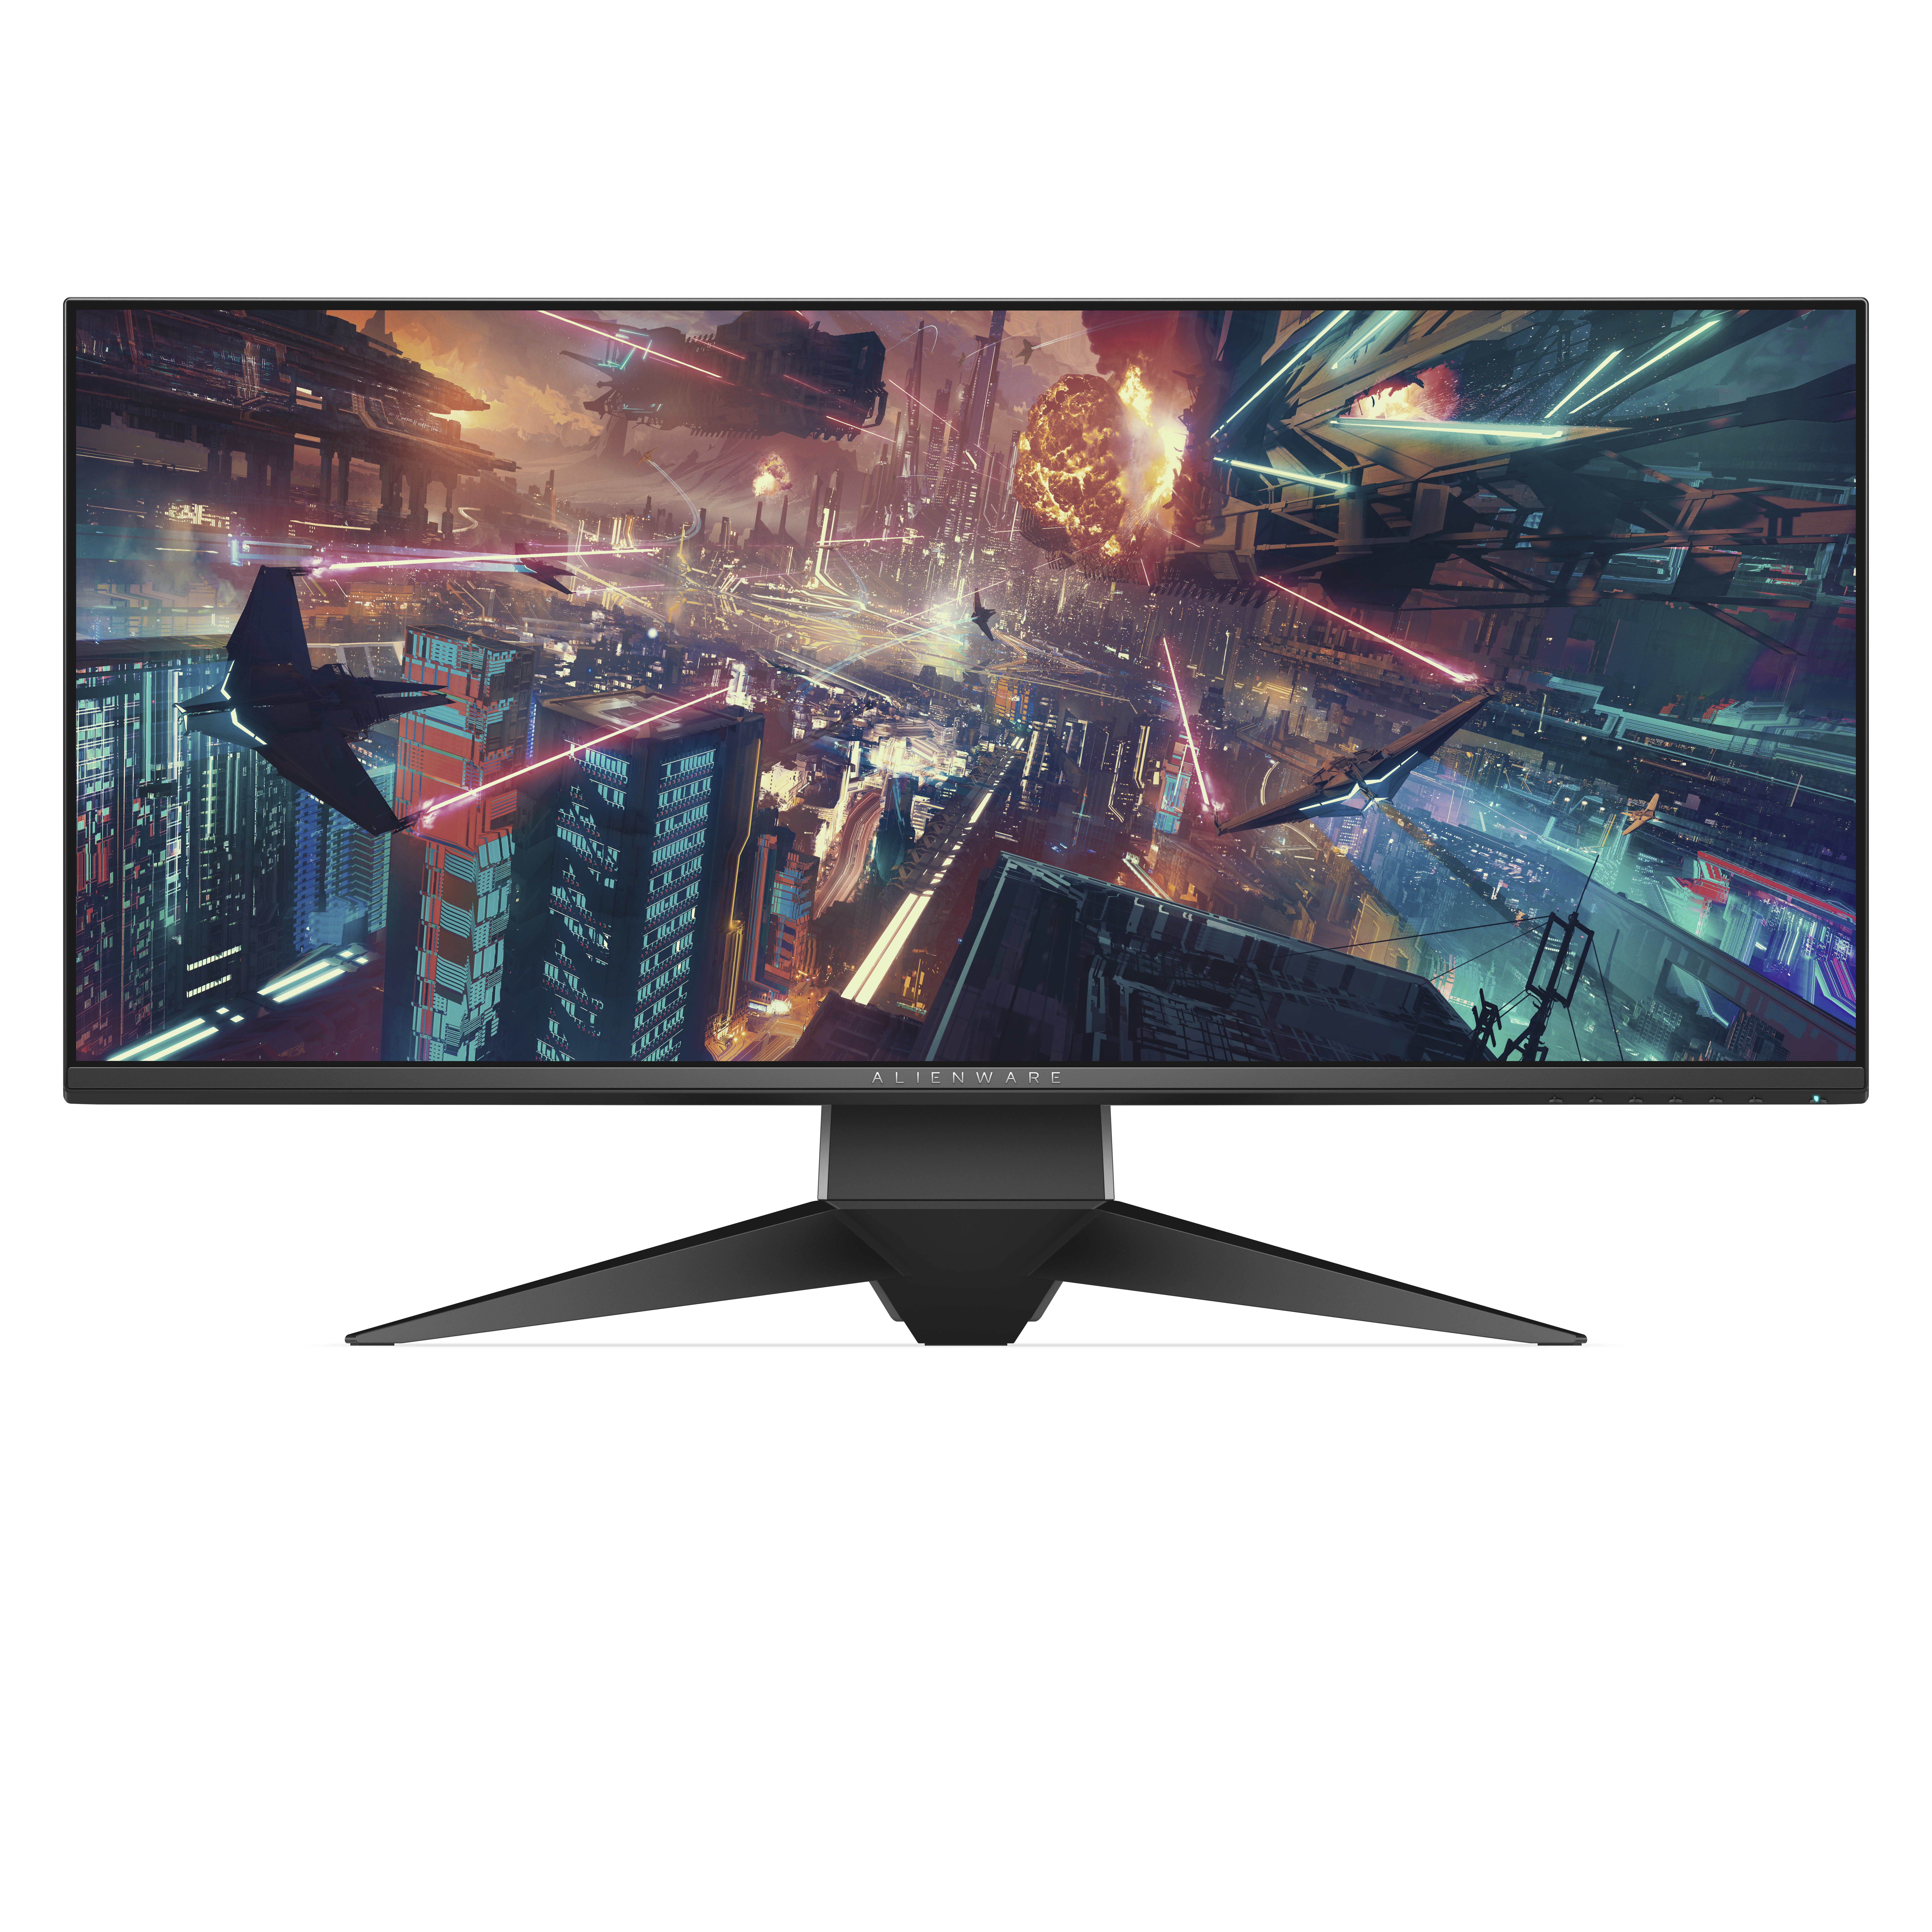 Alienware AW3418HW LED display